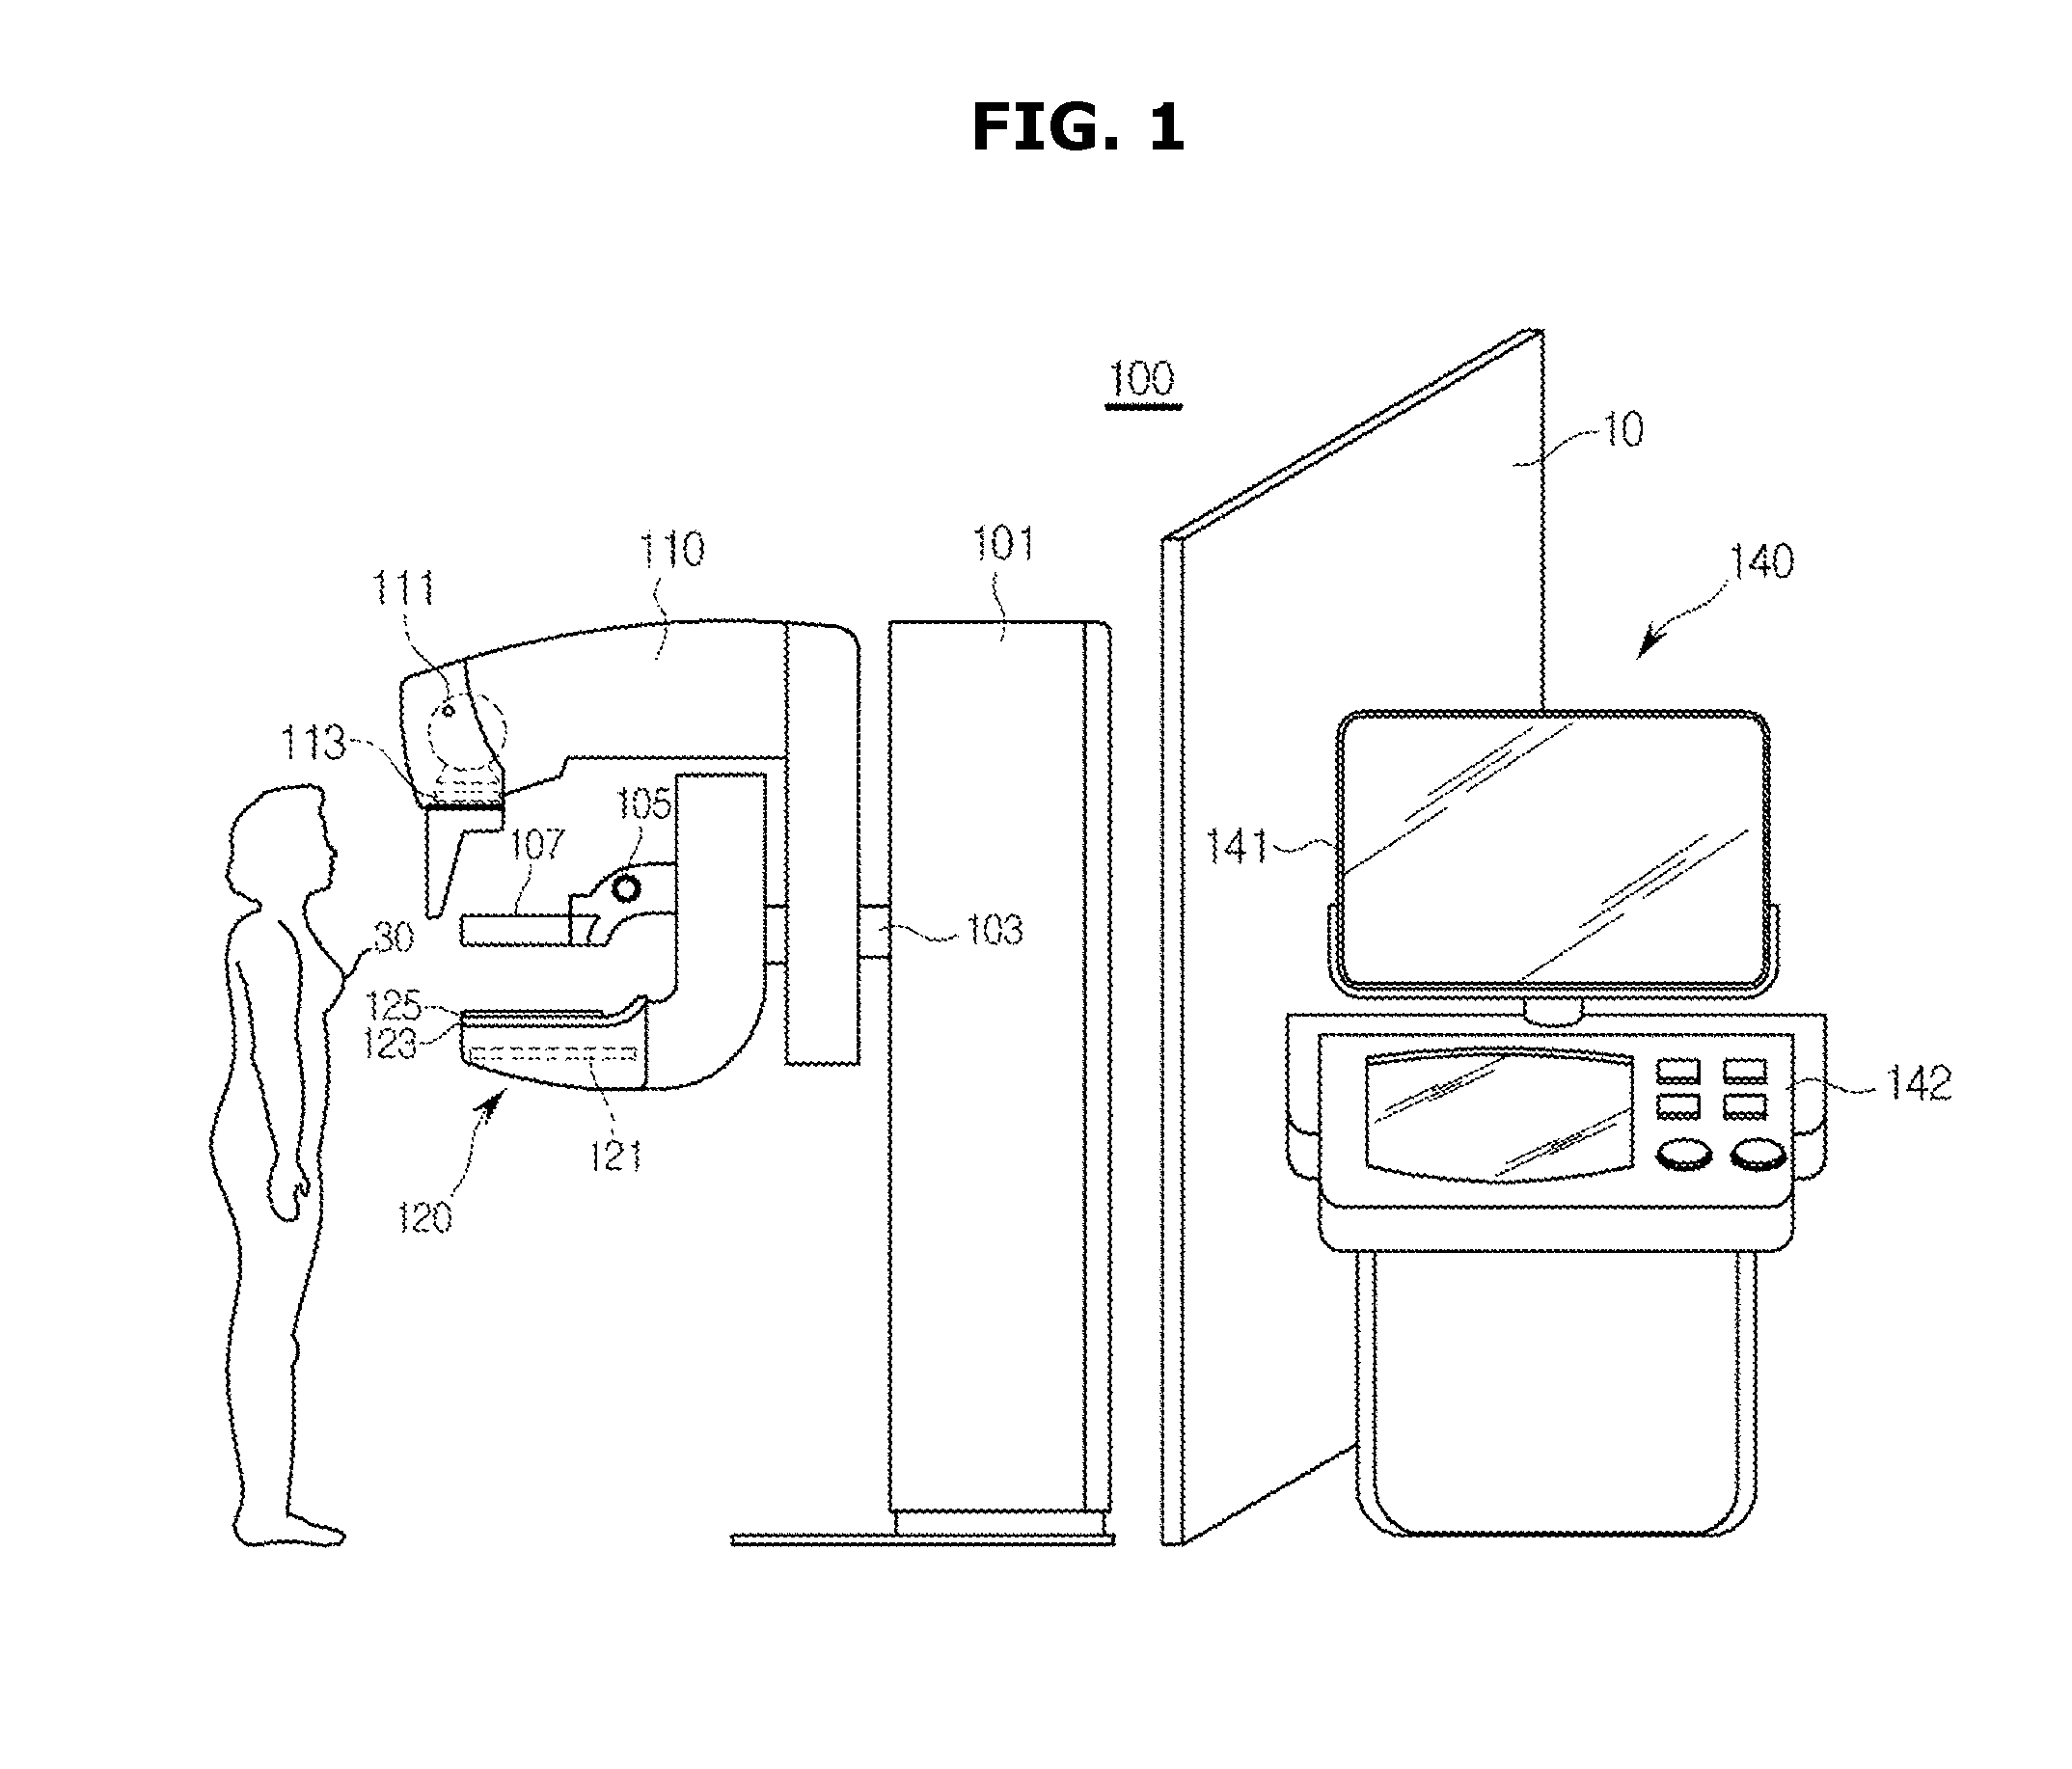 X-ray imaging apparatus and control method therefor